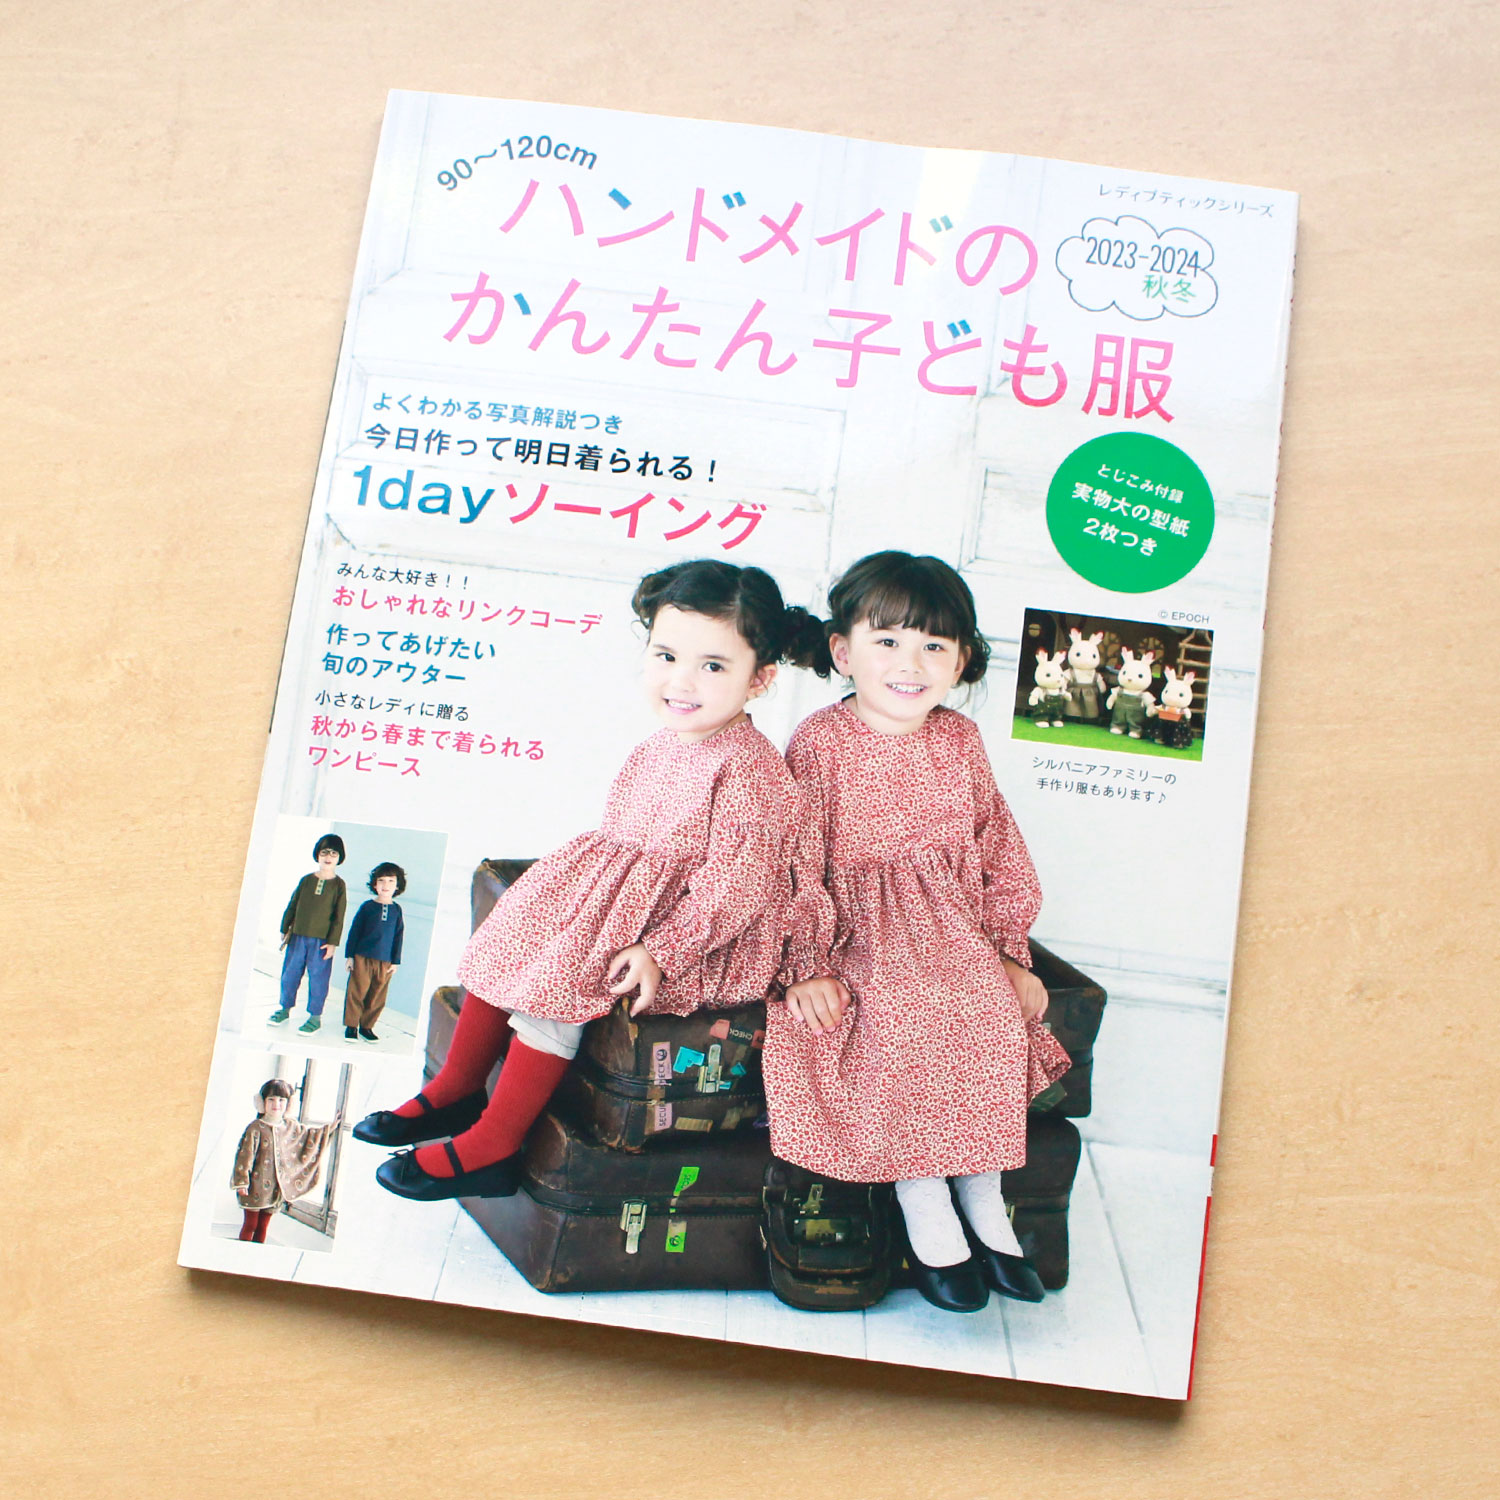 S8460 Handmade Easy Children's Clothing Fall/Winter 2023-2024 Collection(book)